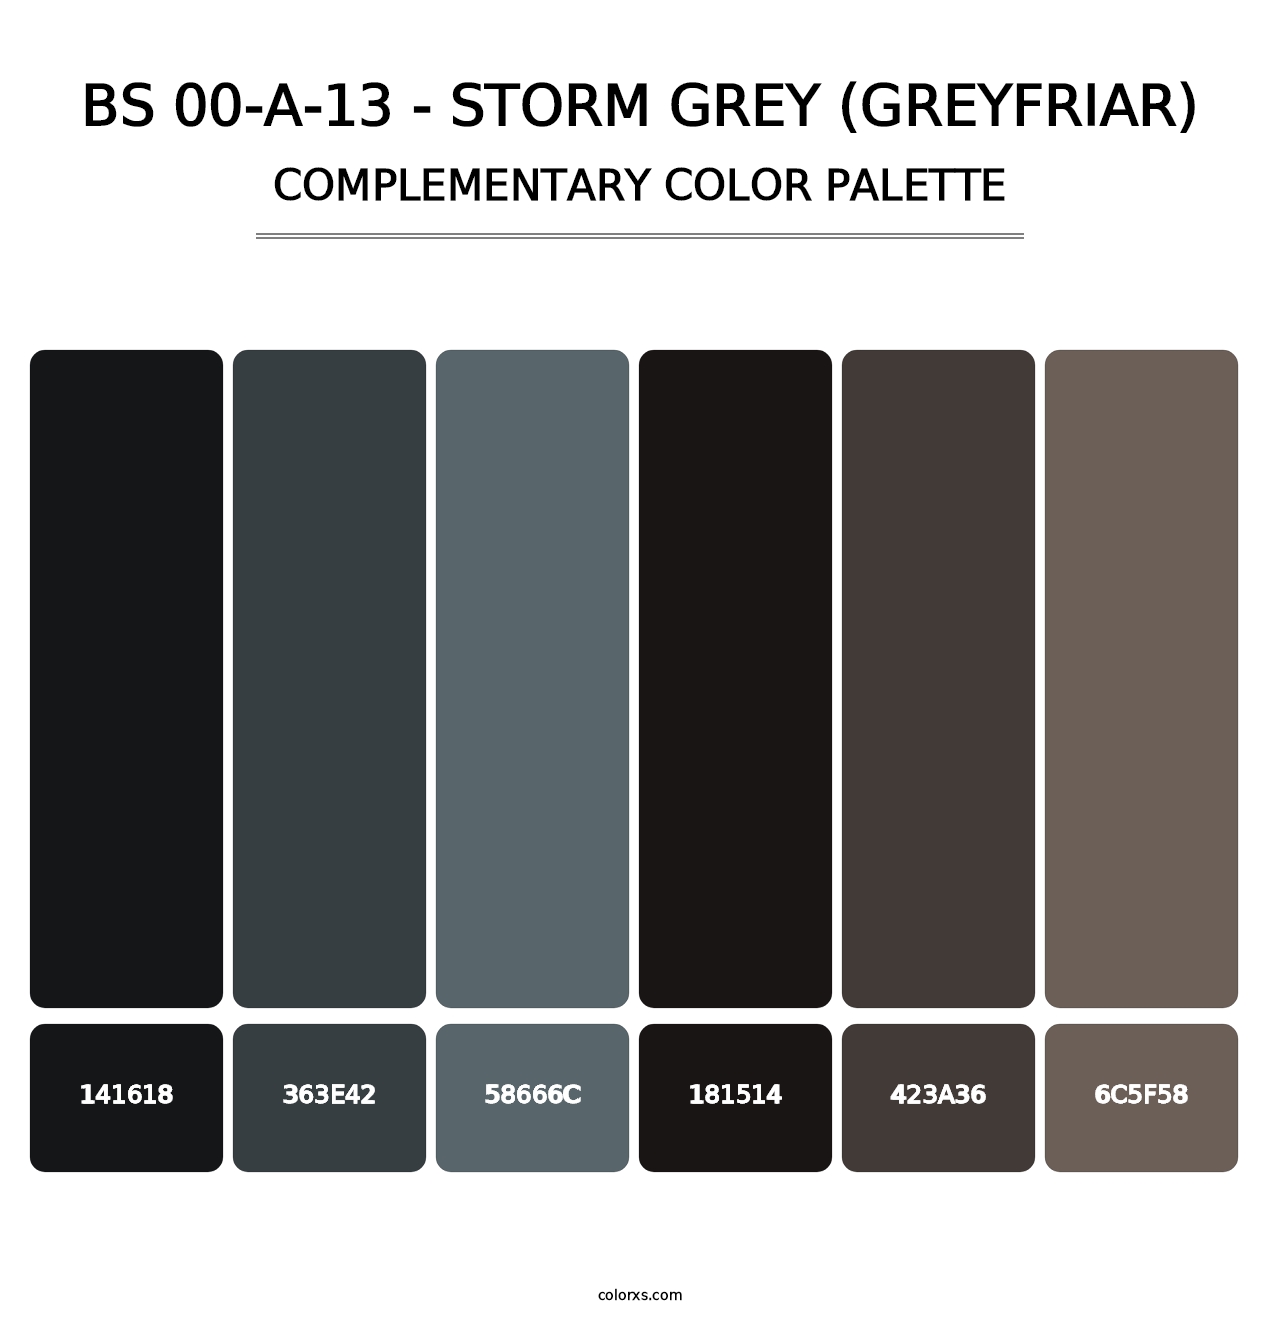 BS 00-A-13 - Storm Grey (Greyfriar) - Complementary Color Palette